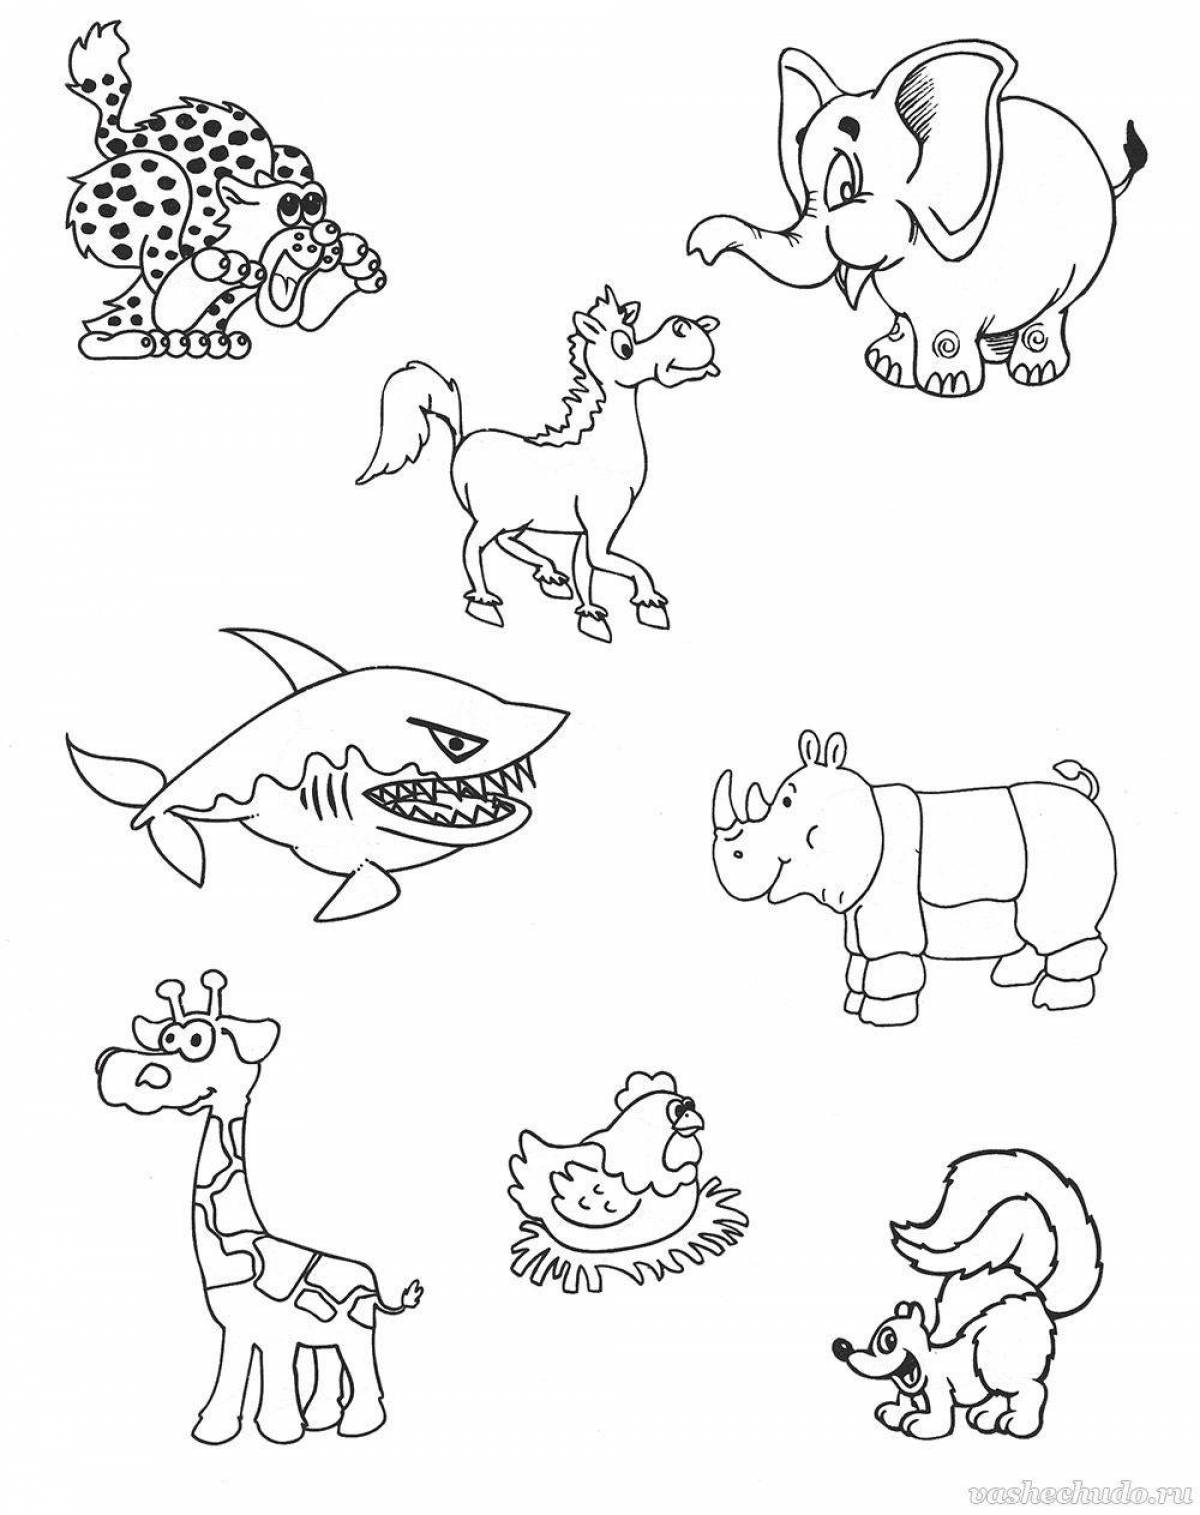 Fun coloring pages animals for kids 5-7 years old